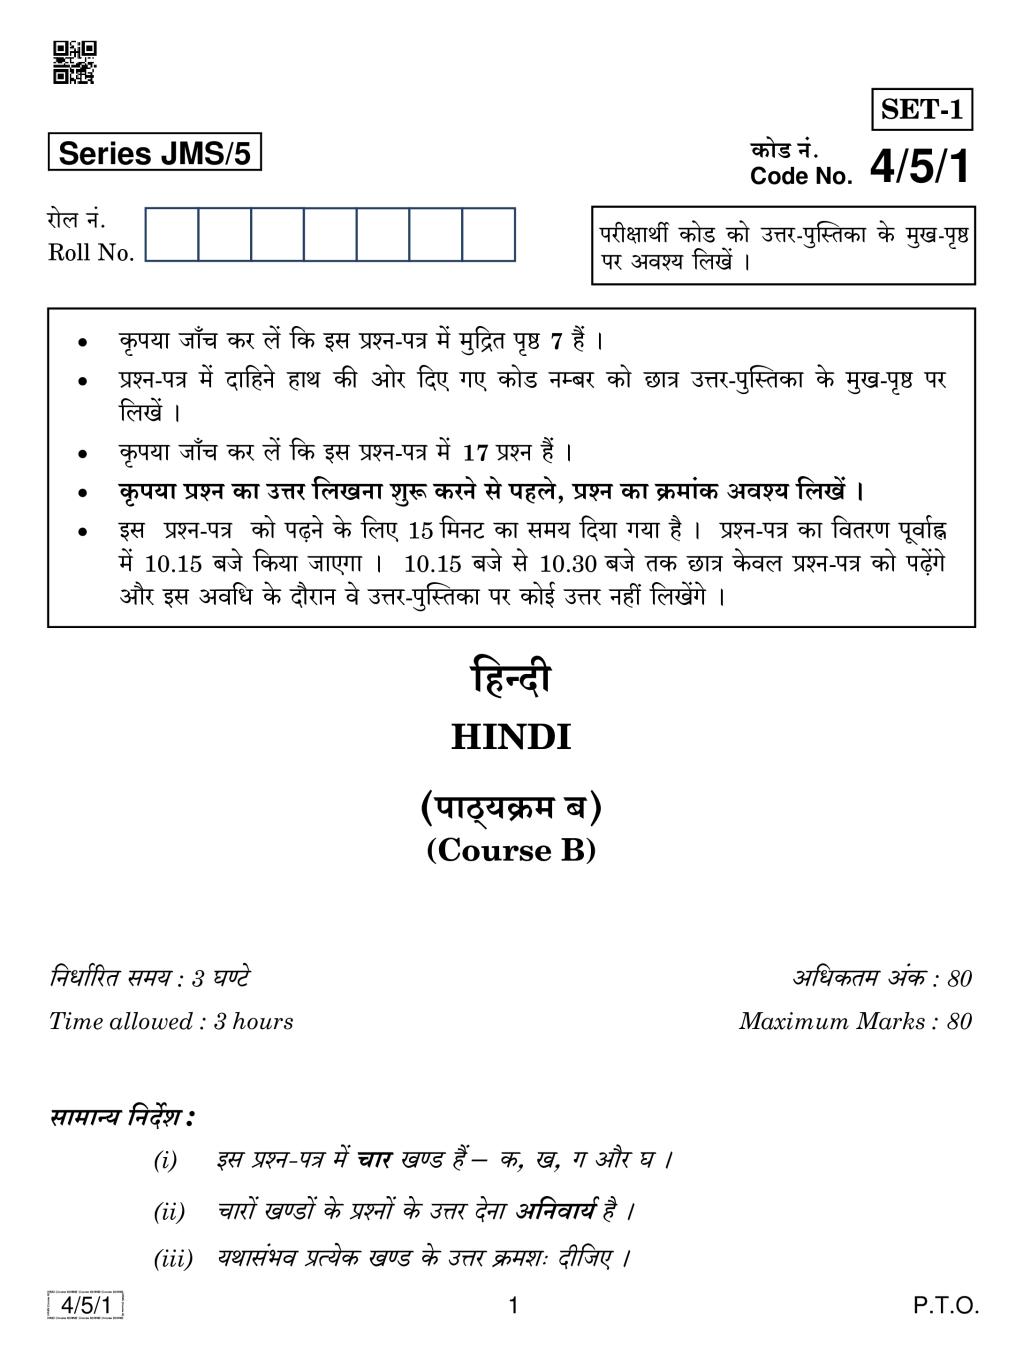 CBSE Class 10 Hindi Course B Question Paper 2019 Set 5 - Page 1